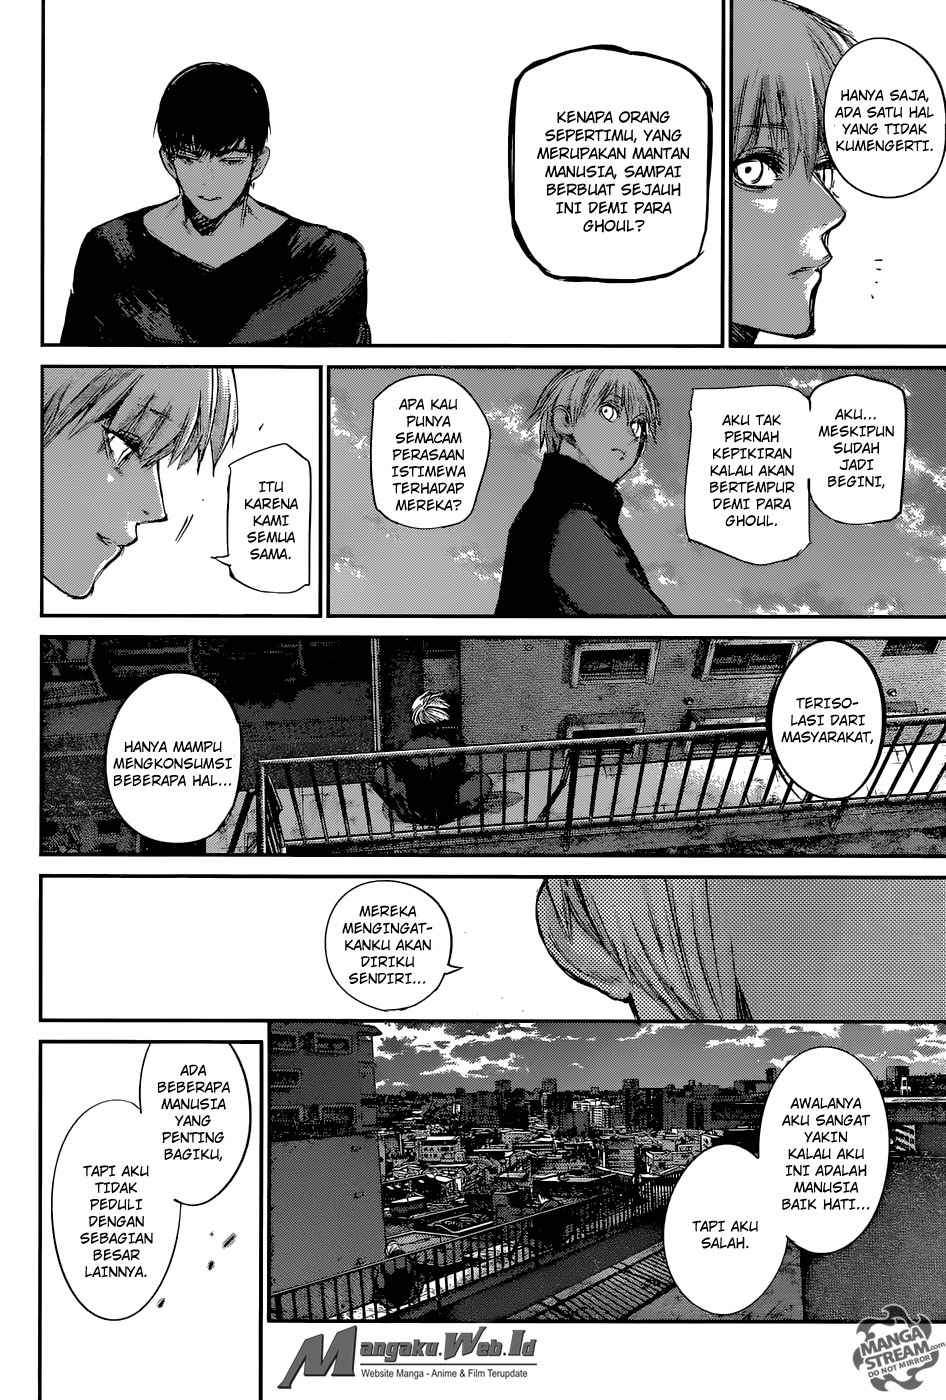 Tokyo Ghoul:re Chapter 119